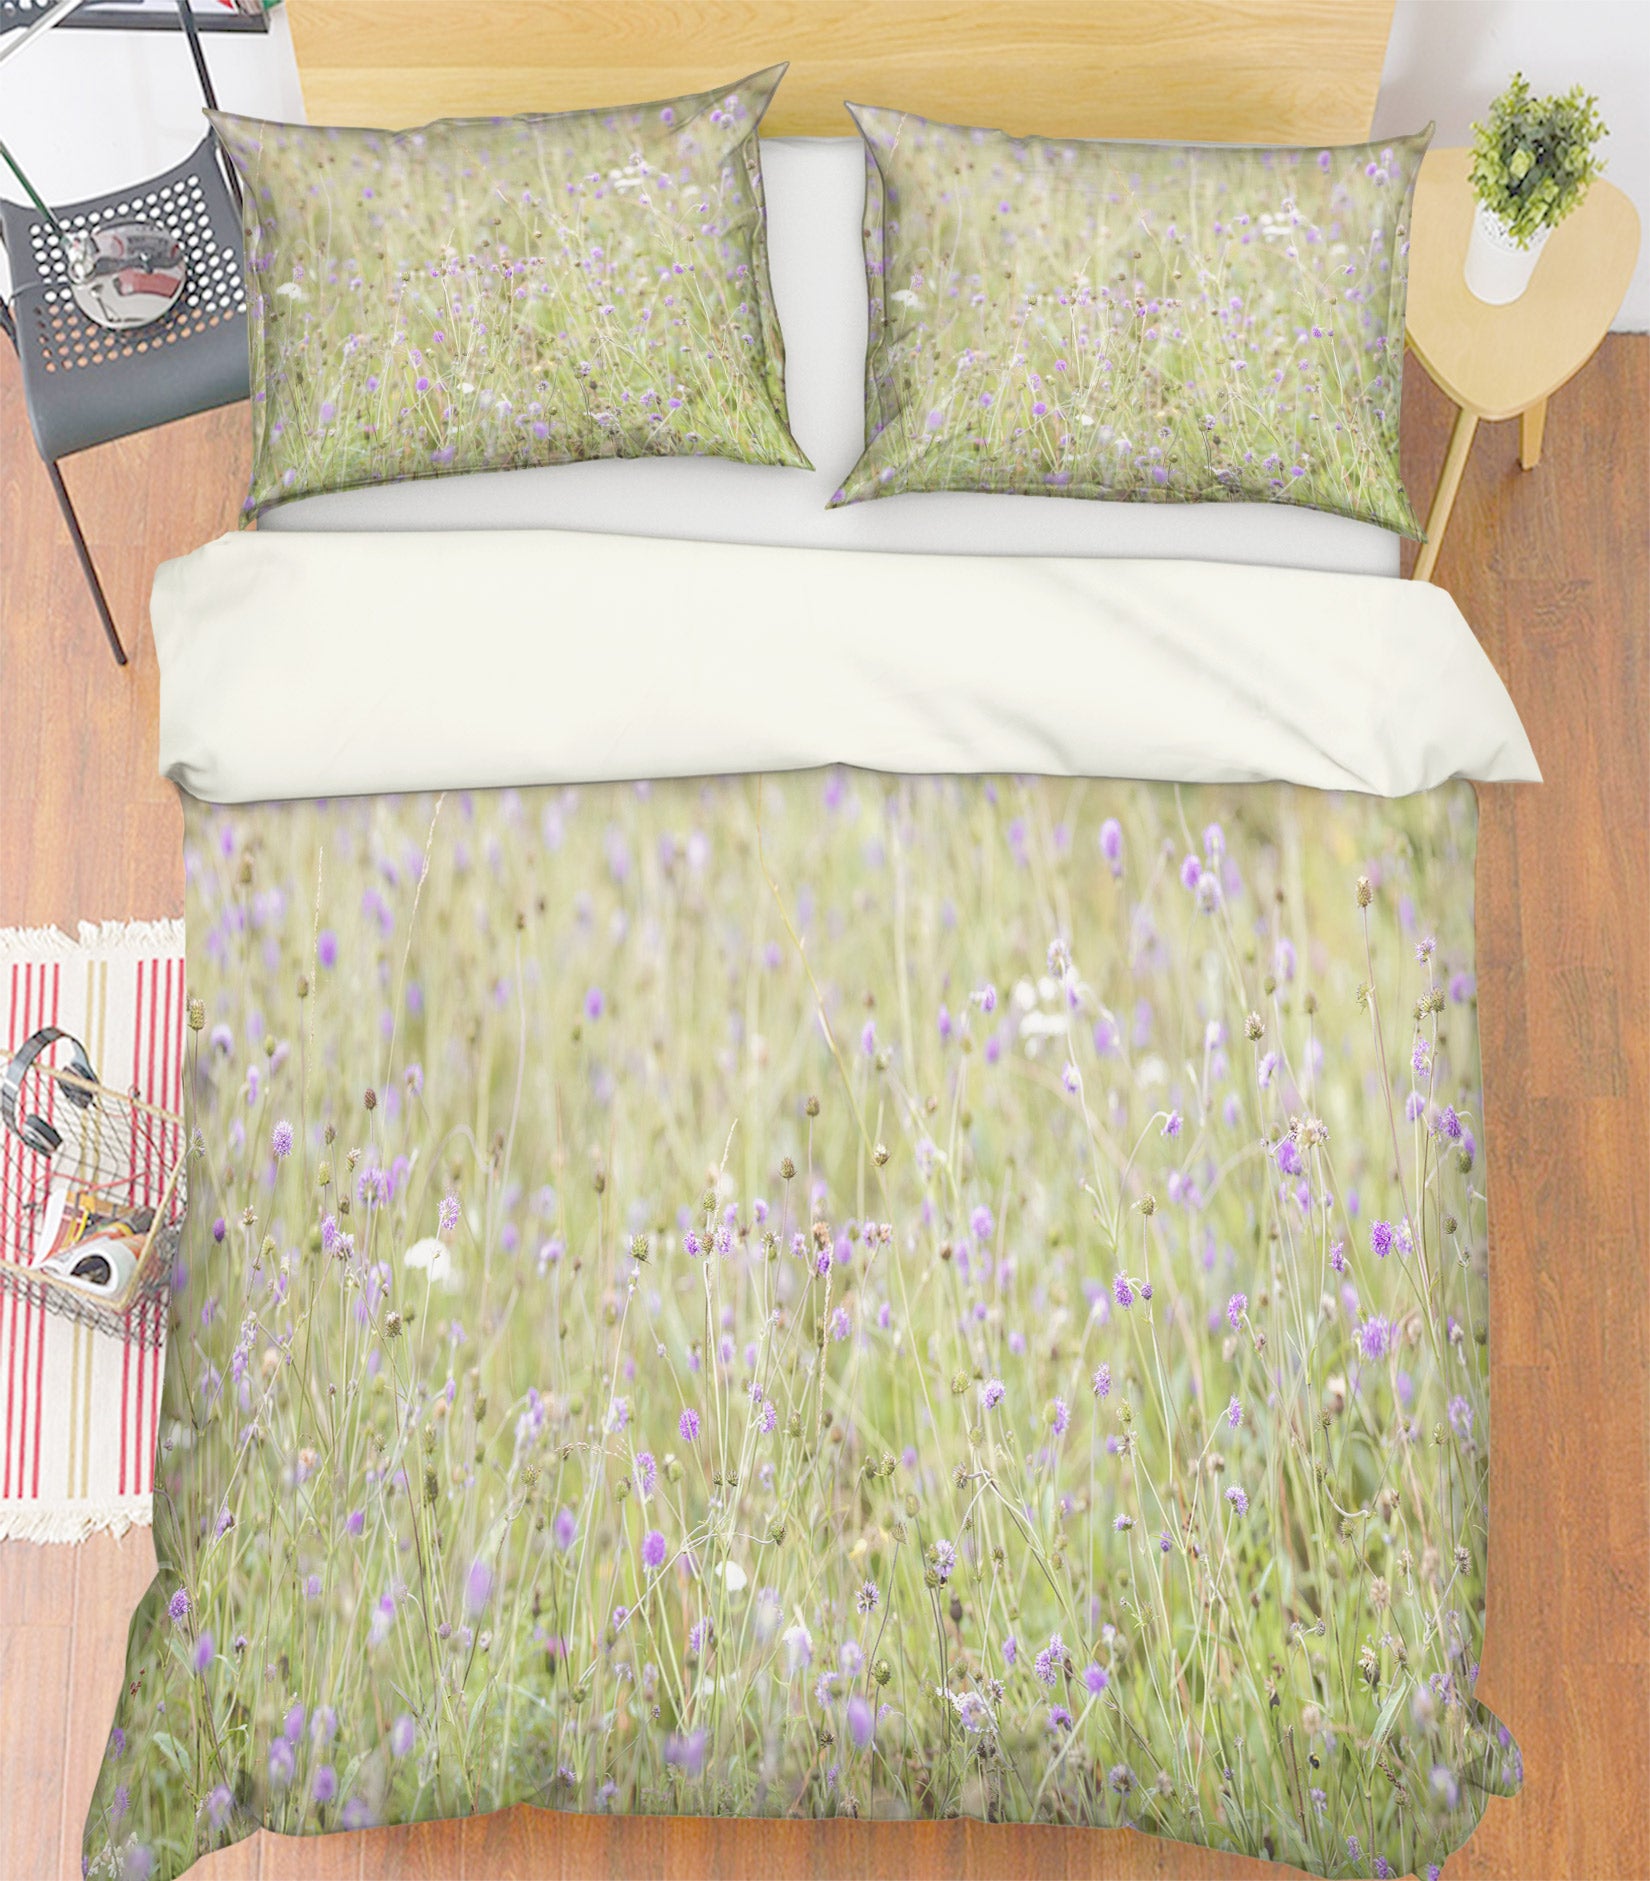 3D Lawn Wildflowers 6947 Assaf Frank Bedding Bed Pillowcases Quilt Cover Duvet Cover